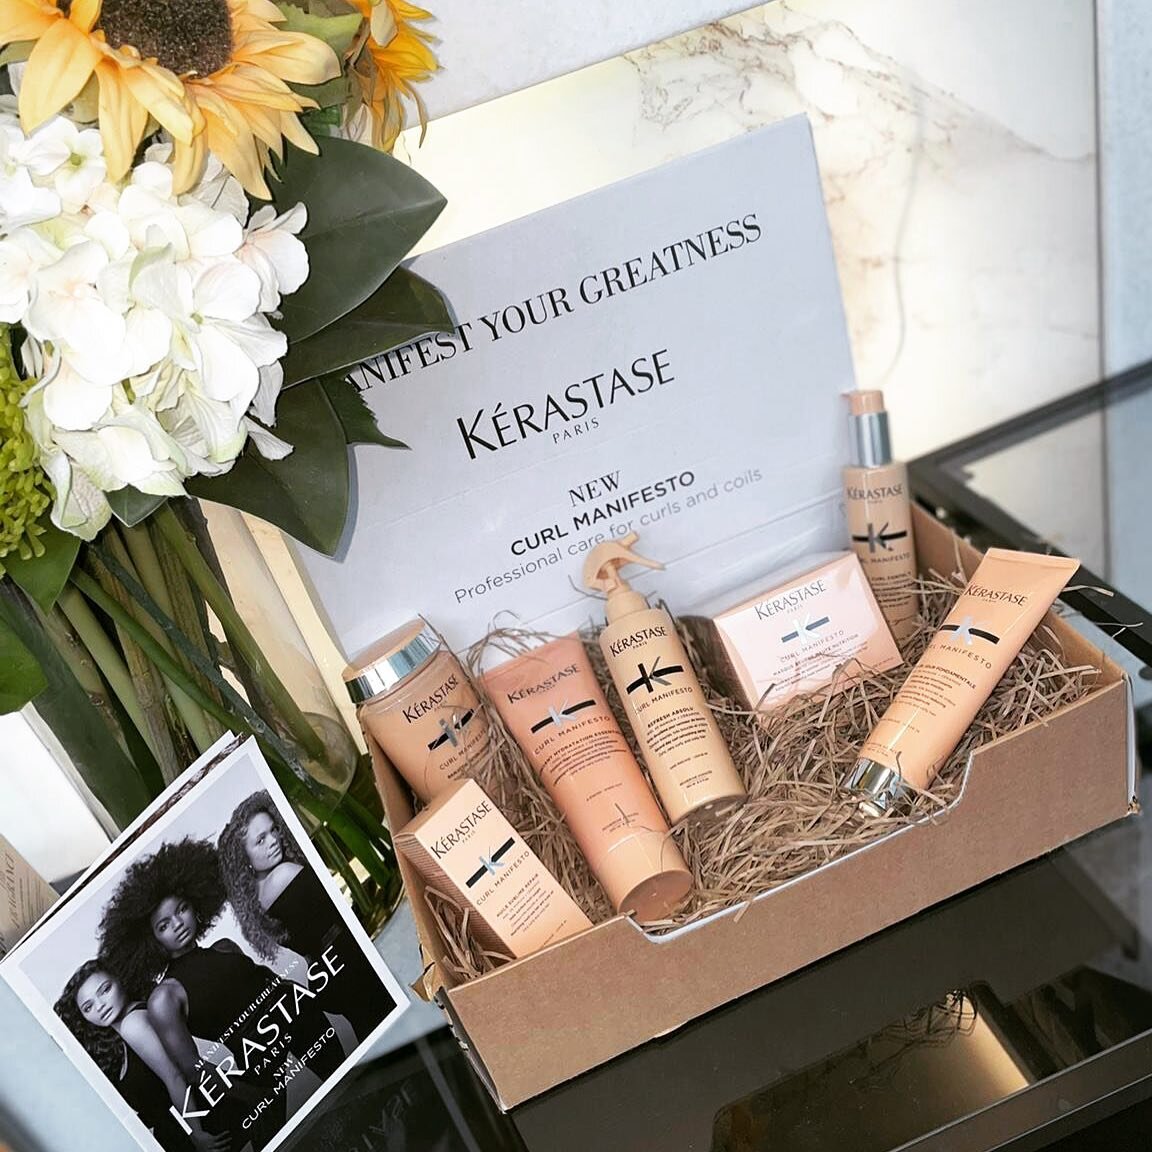 🧡 C U R L  M A N I F E S T O 🧡

@kerastase_official brand new range for Curly hair. 
Our clients are loving it at the moment.

Full range available in salon 💇🏼&zwj;♀️